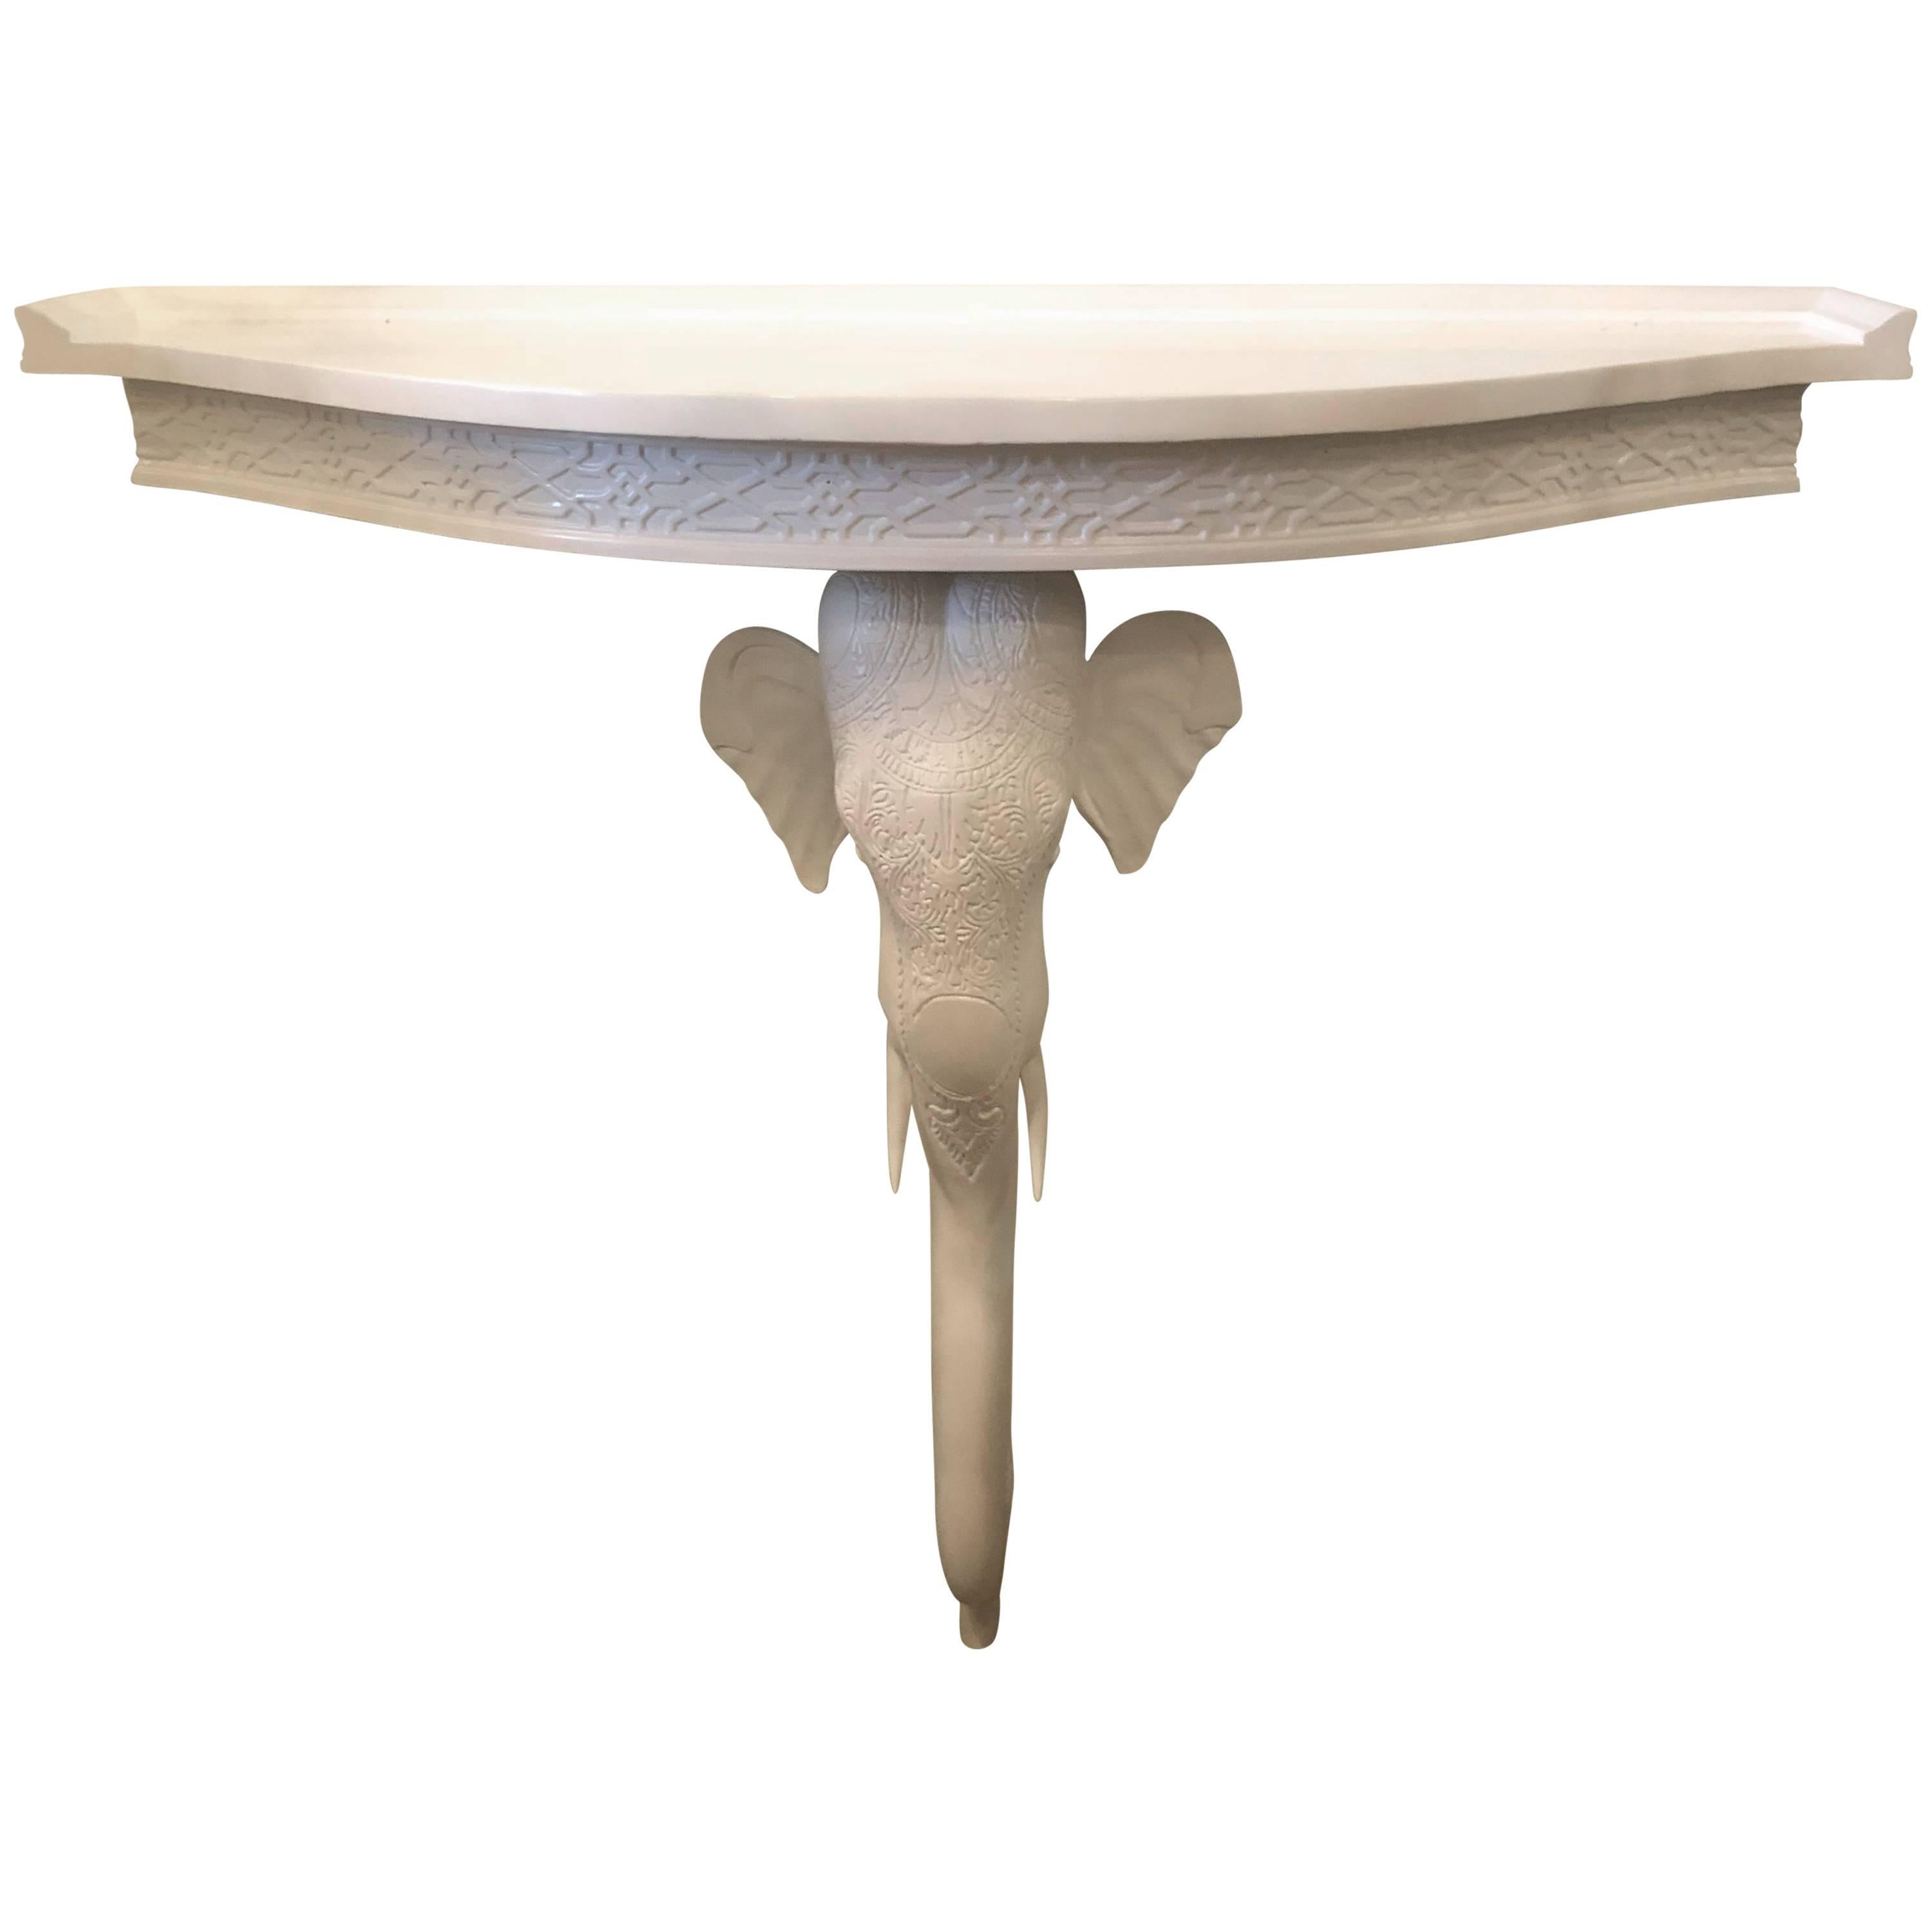 Gampel & Stoll Elephant Fret Wall Console Table Demilune Lacquered White